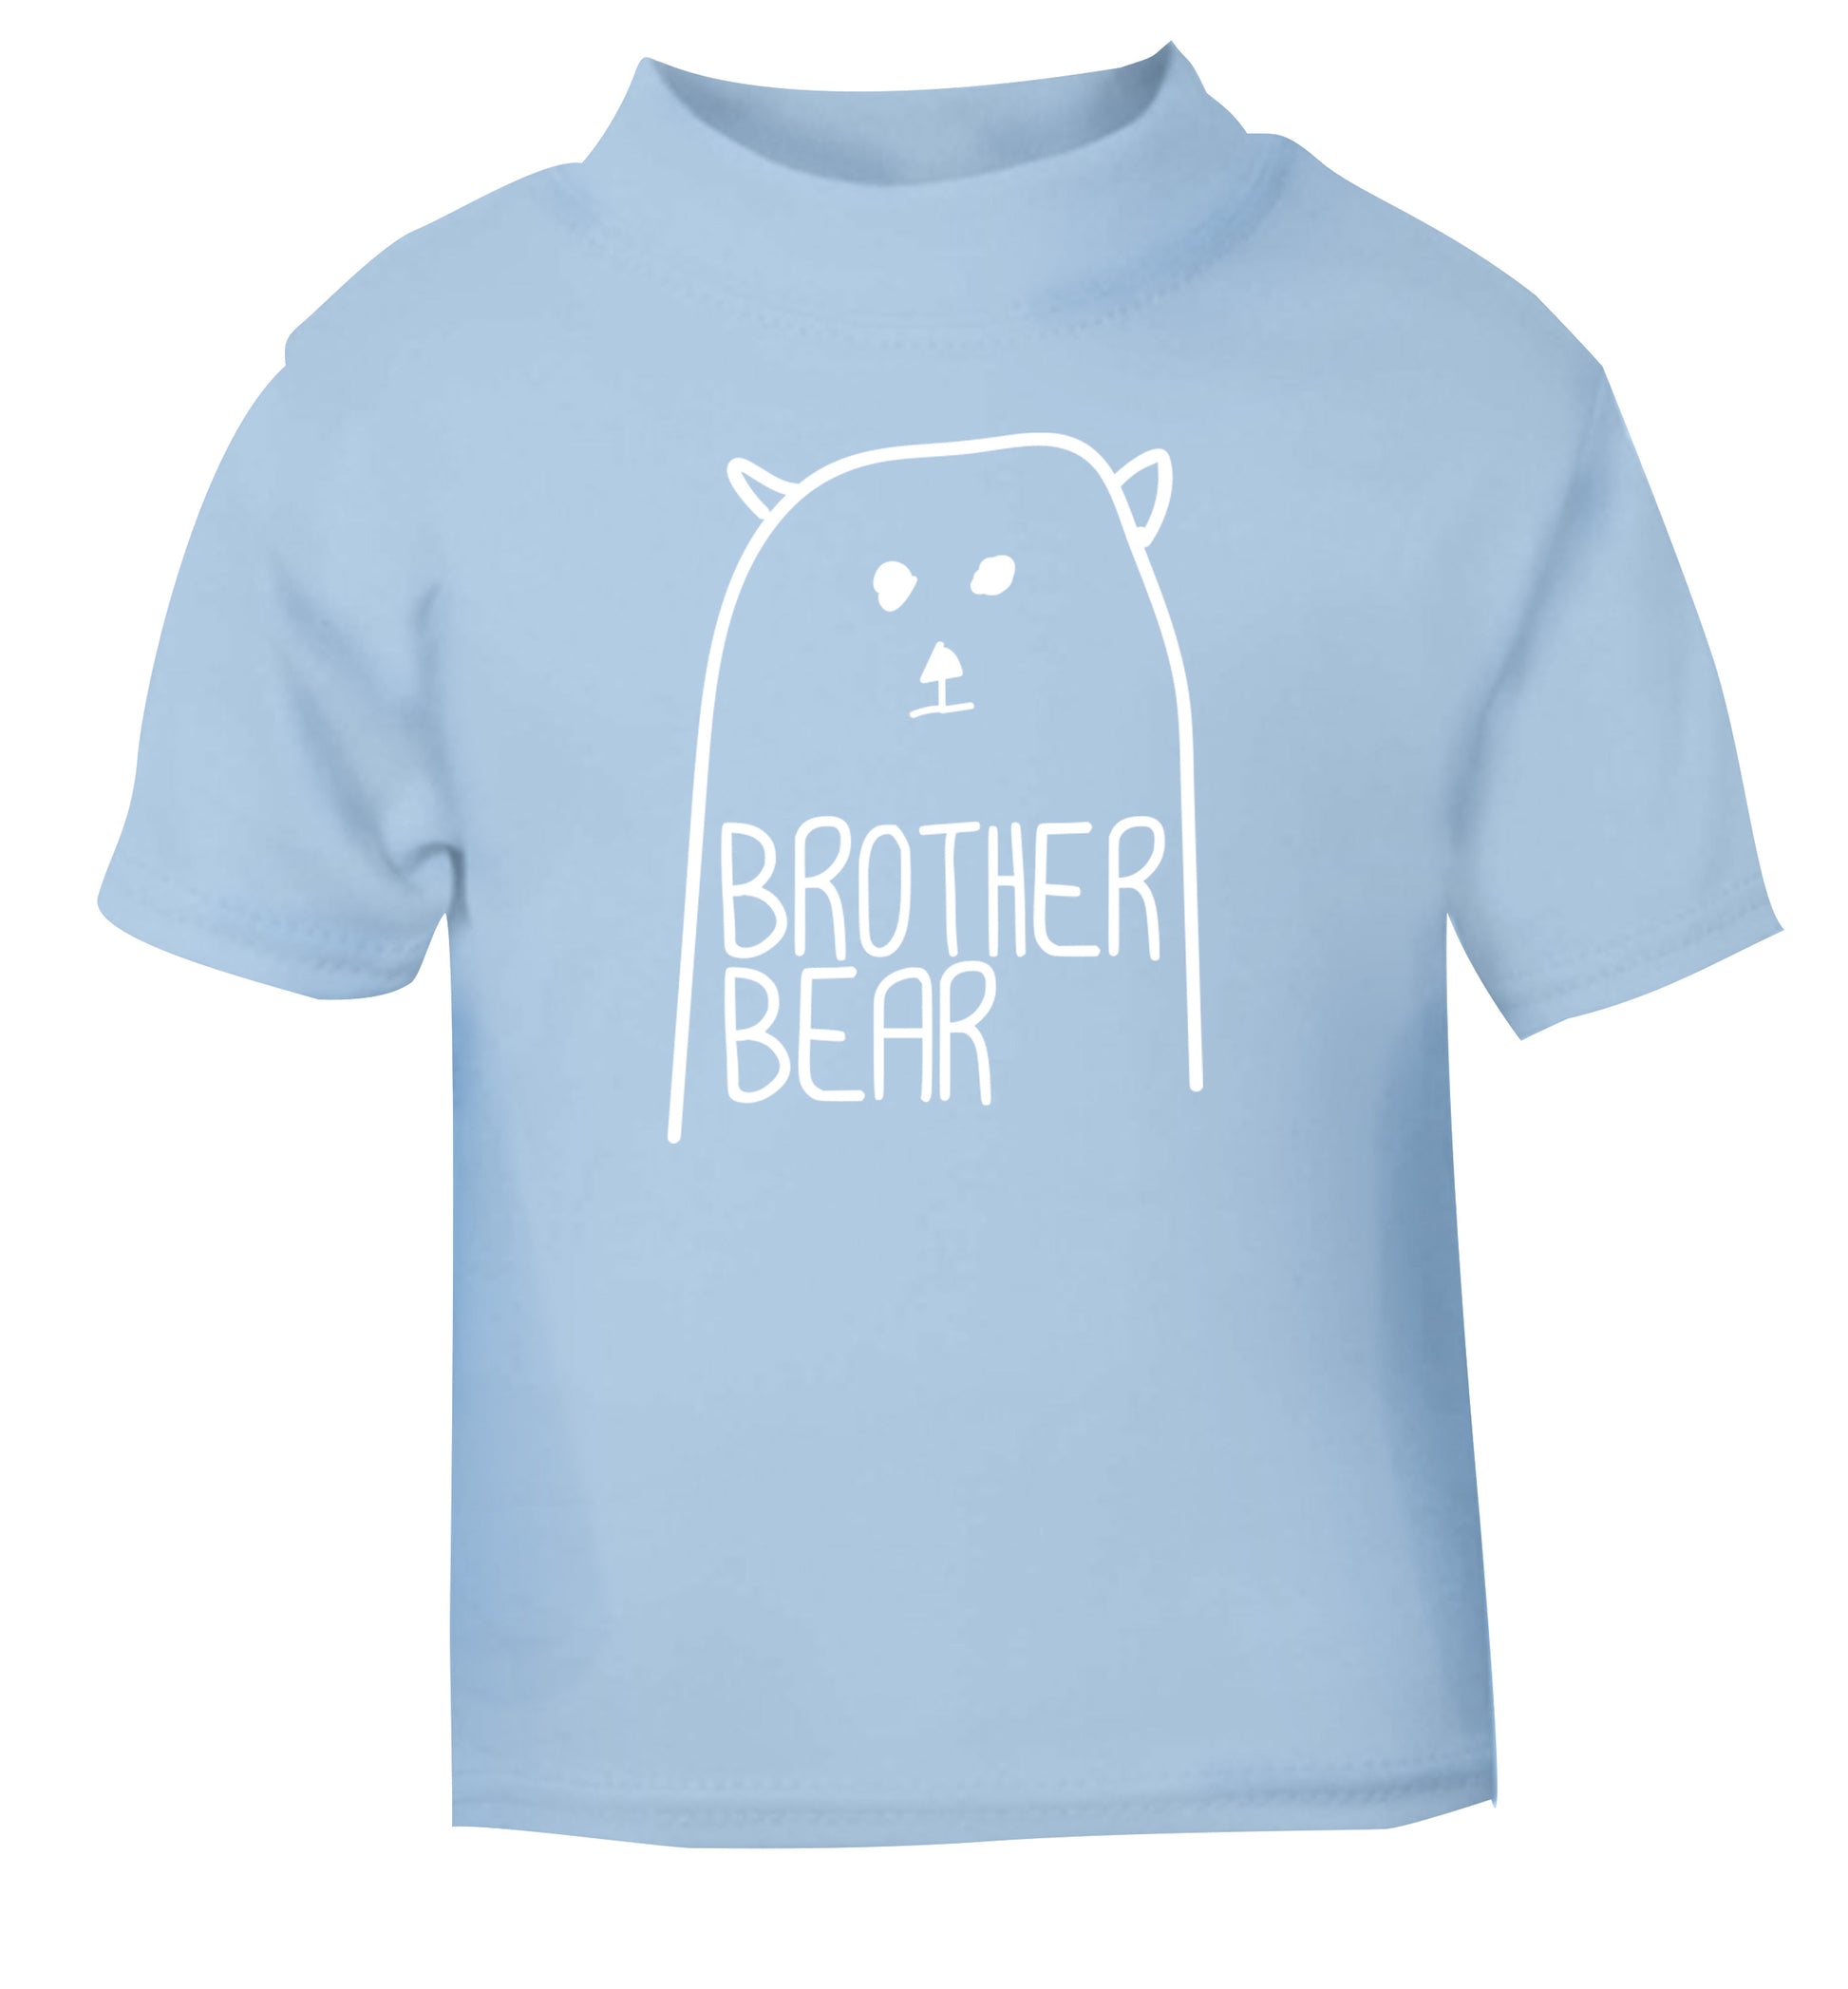 Brother bear light blue Baby Toddler Tshirt 2 Years